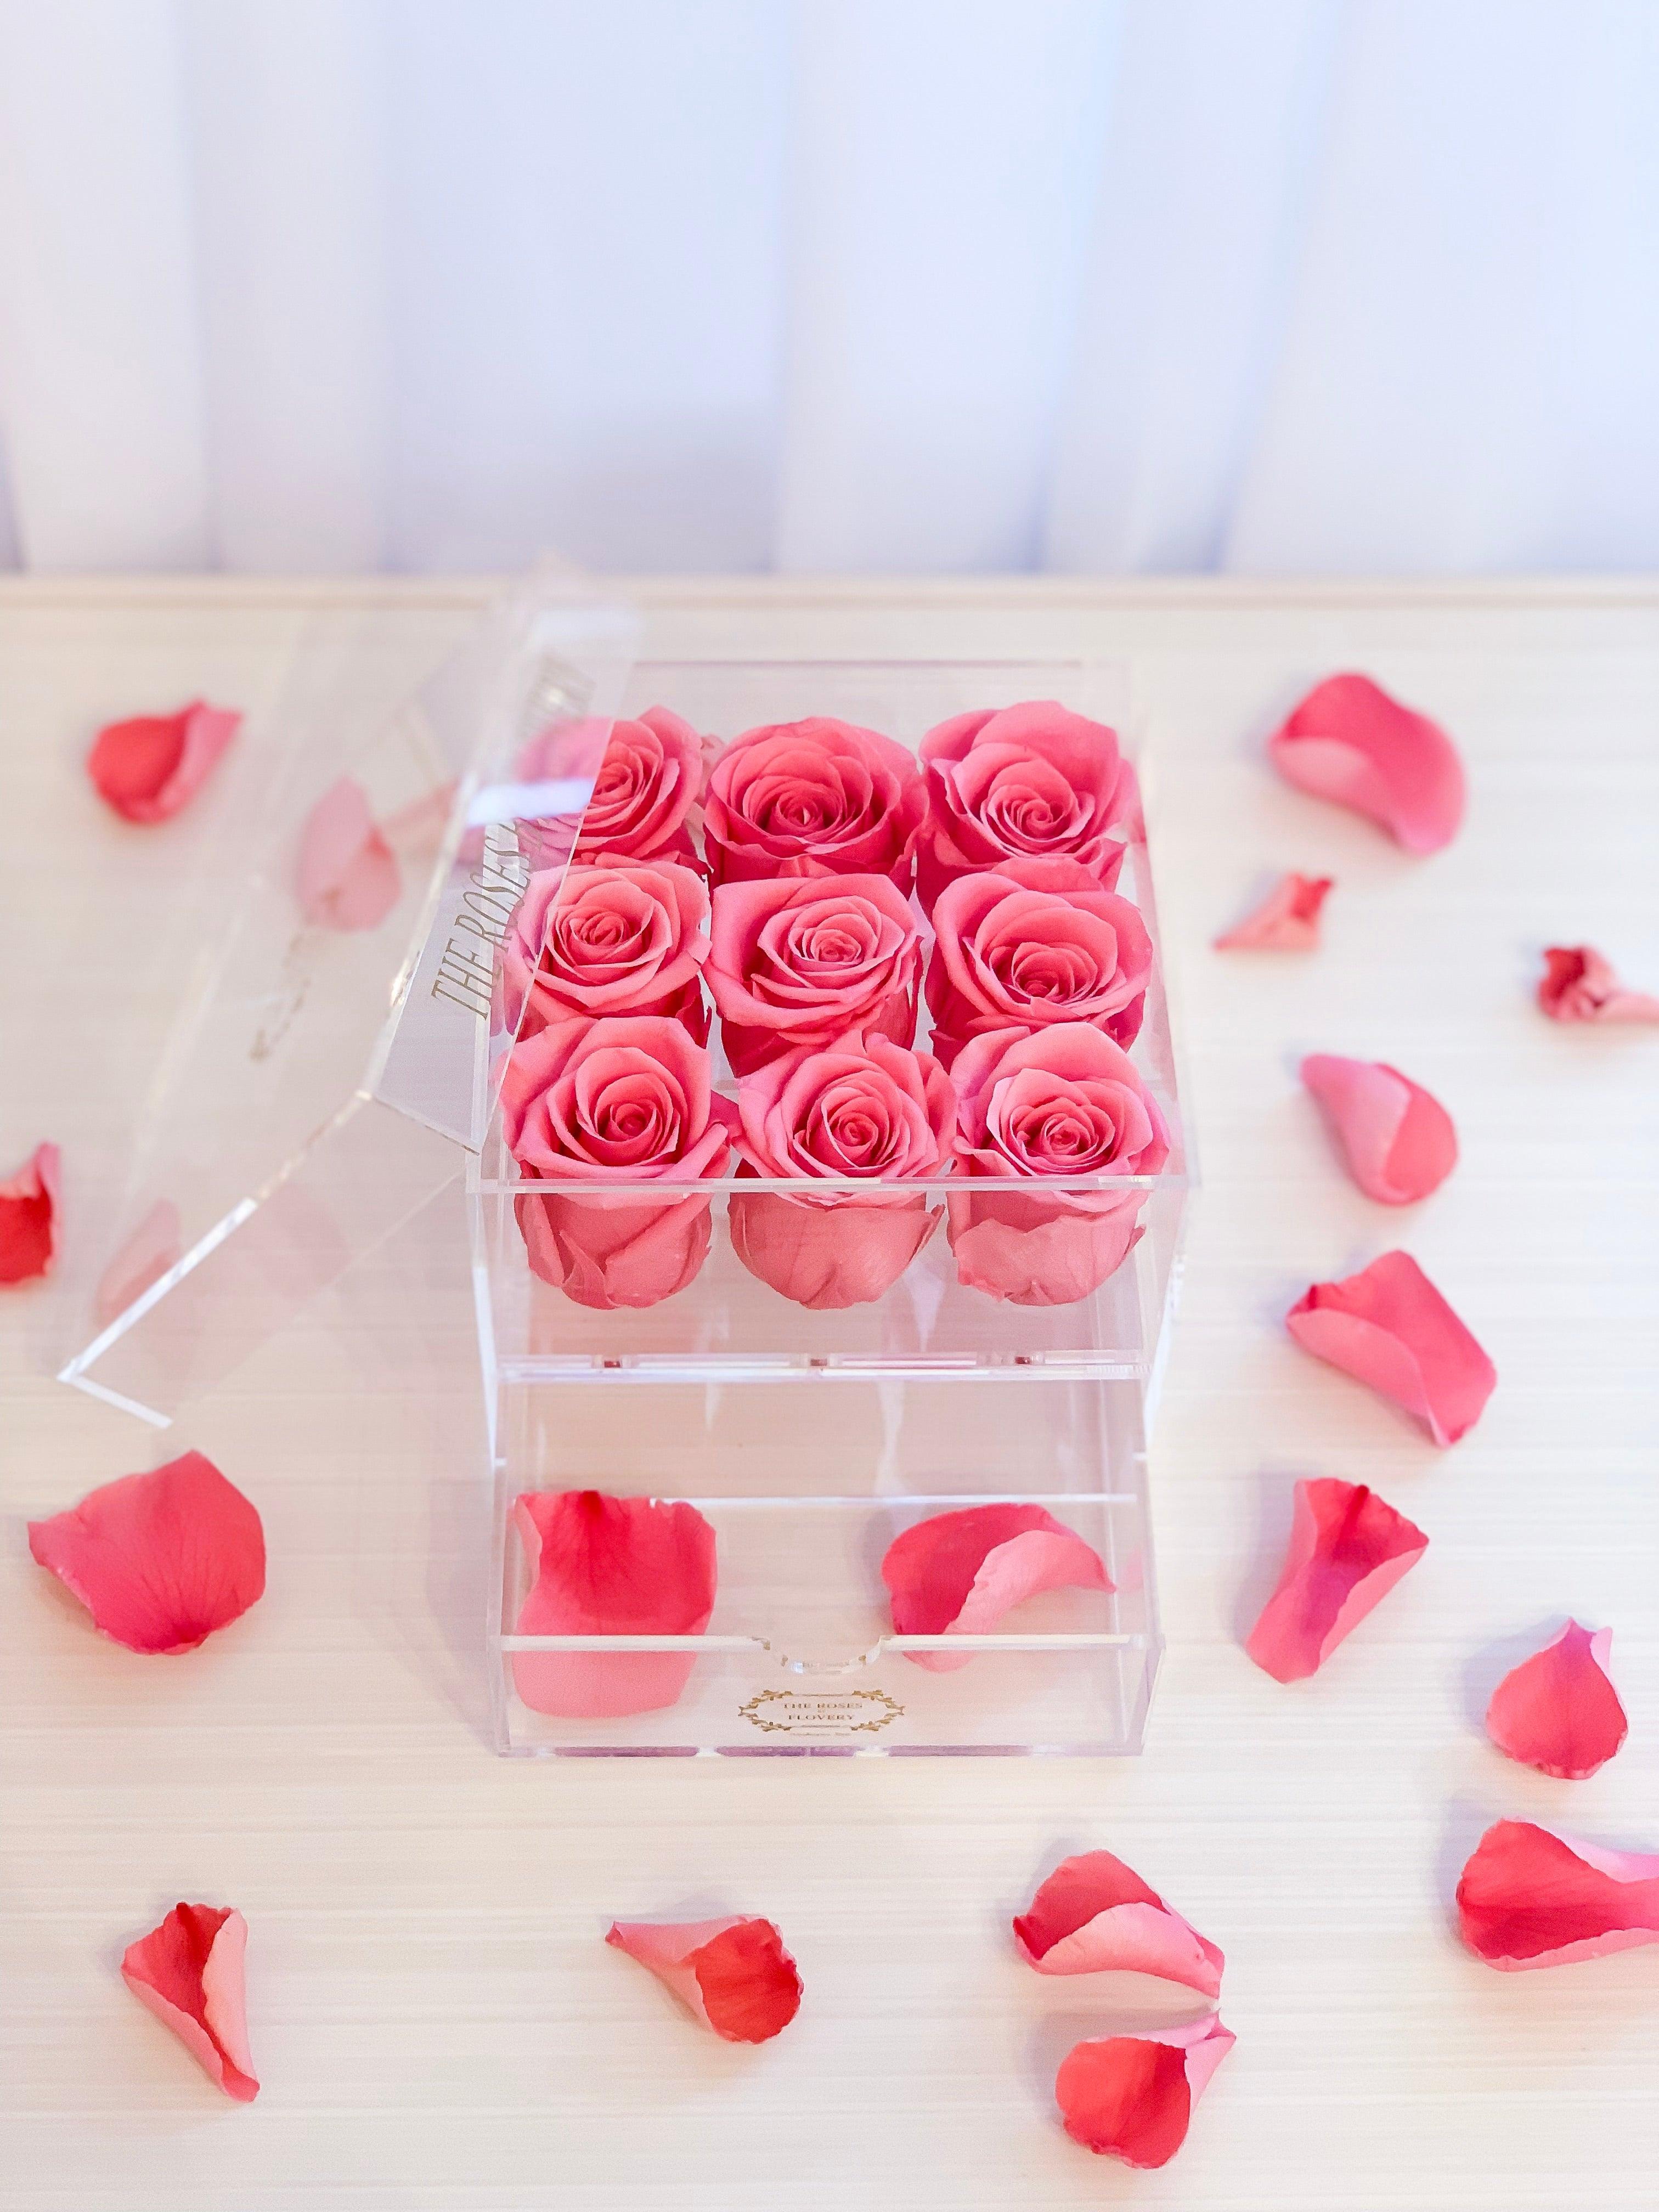 9 PREMIUM ECUADOR PRESERVED SWEET PINK ROSES ARRANGEMENT IN JEWELRY ACRYLIC BOX WITH DRAWER - Flovery